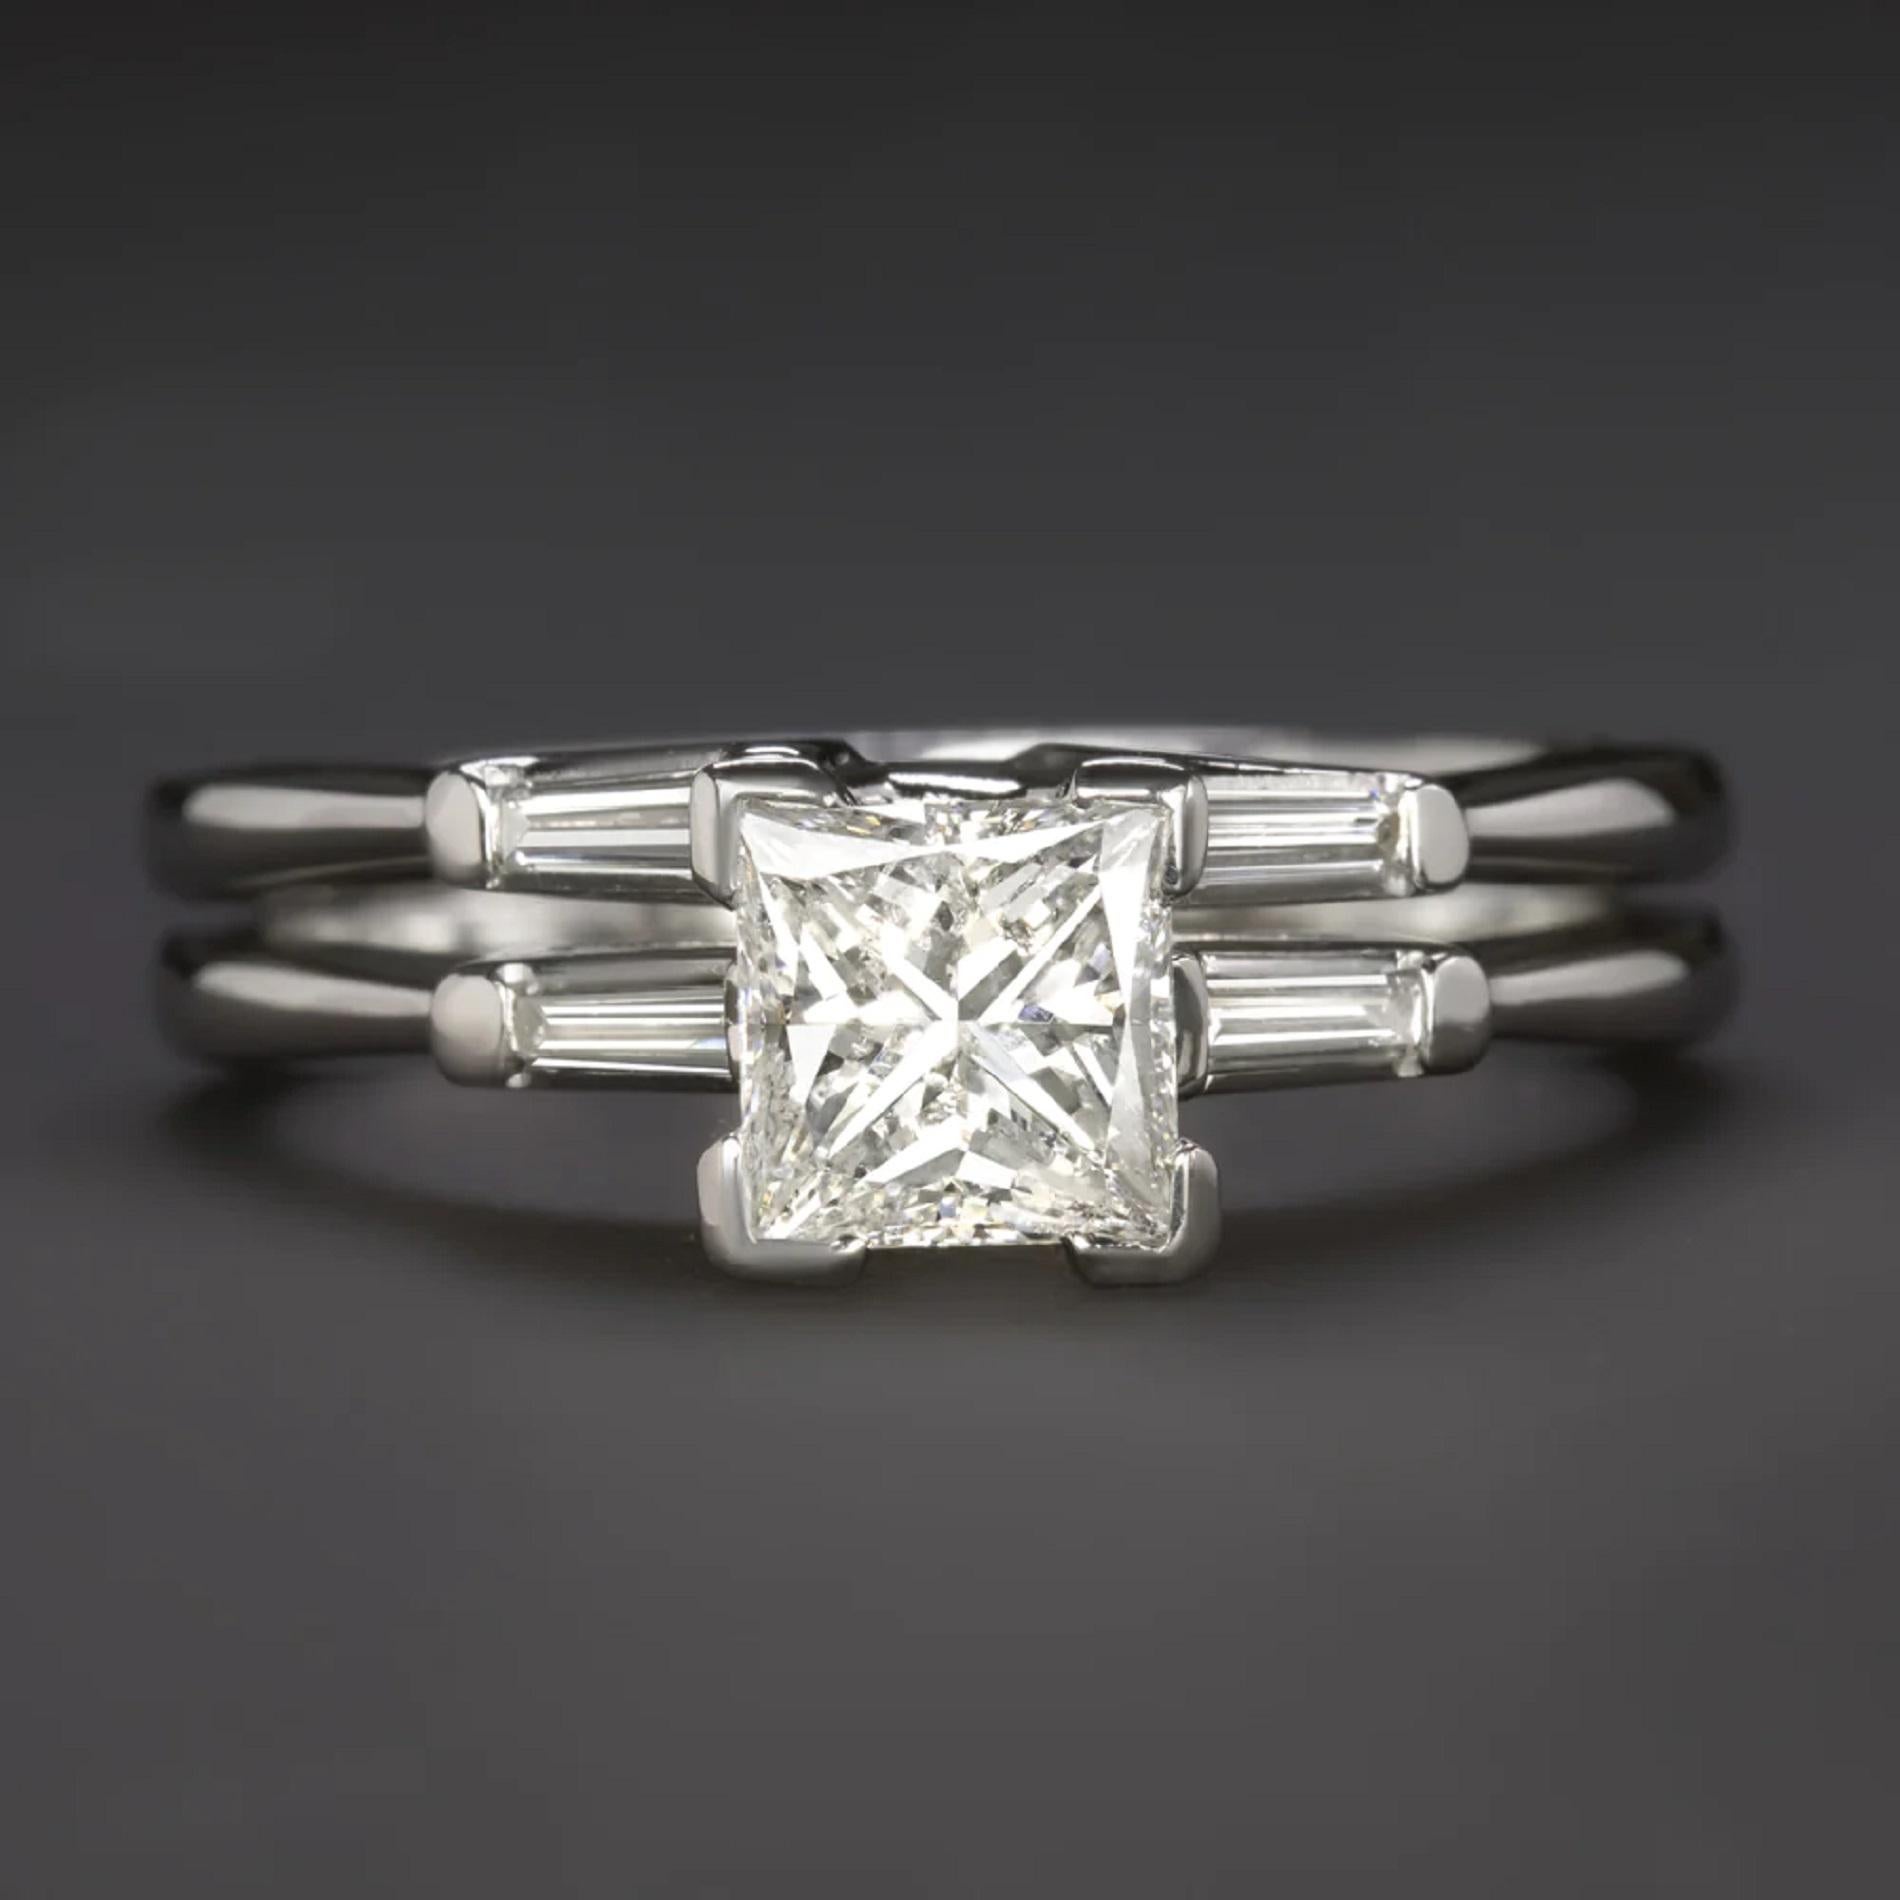 diamond wedding set has a classic design with a princess cut diamond center flanked by sleek baguette cut diamonds. It’s a timeless look that will remain forever in style

Highlights:

- Substantial 1.10ct princess cut diamond center

- Center